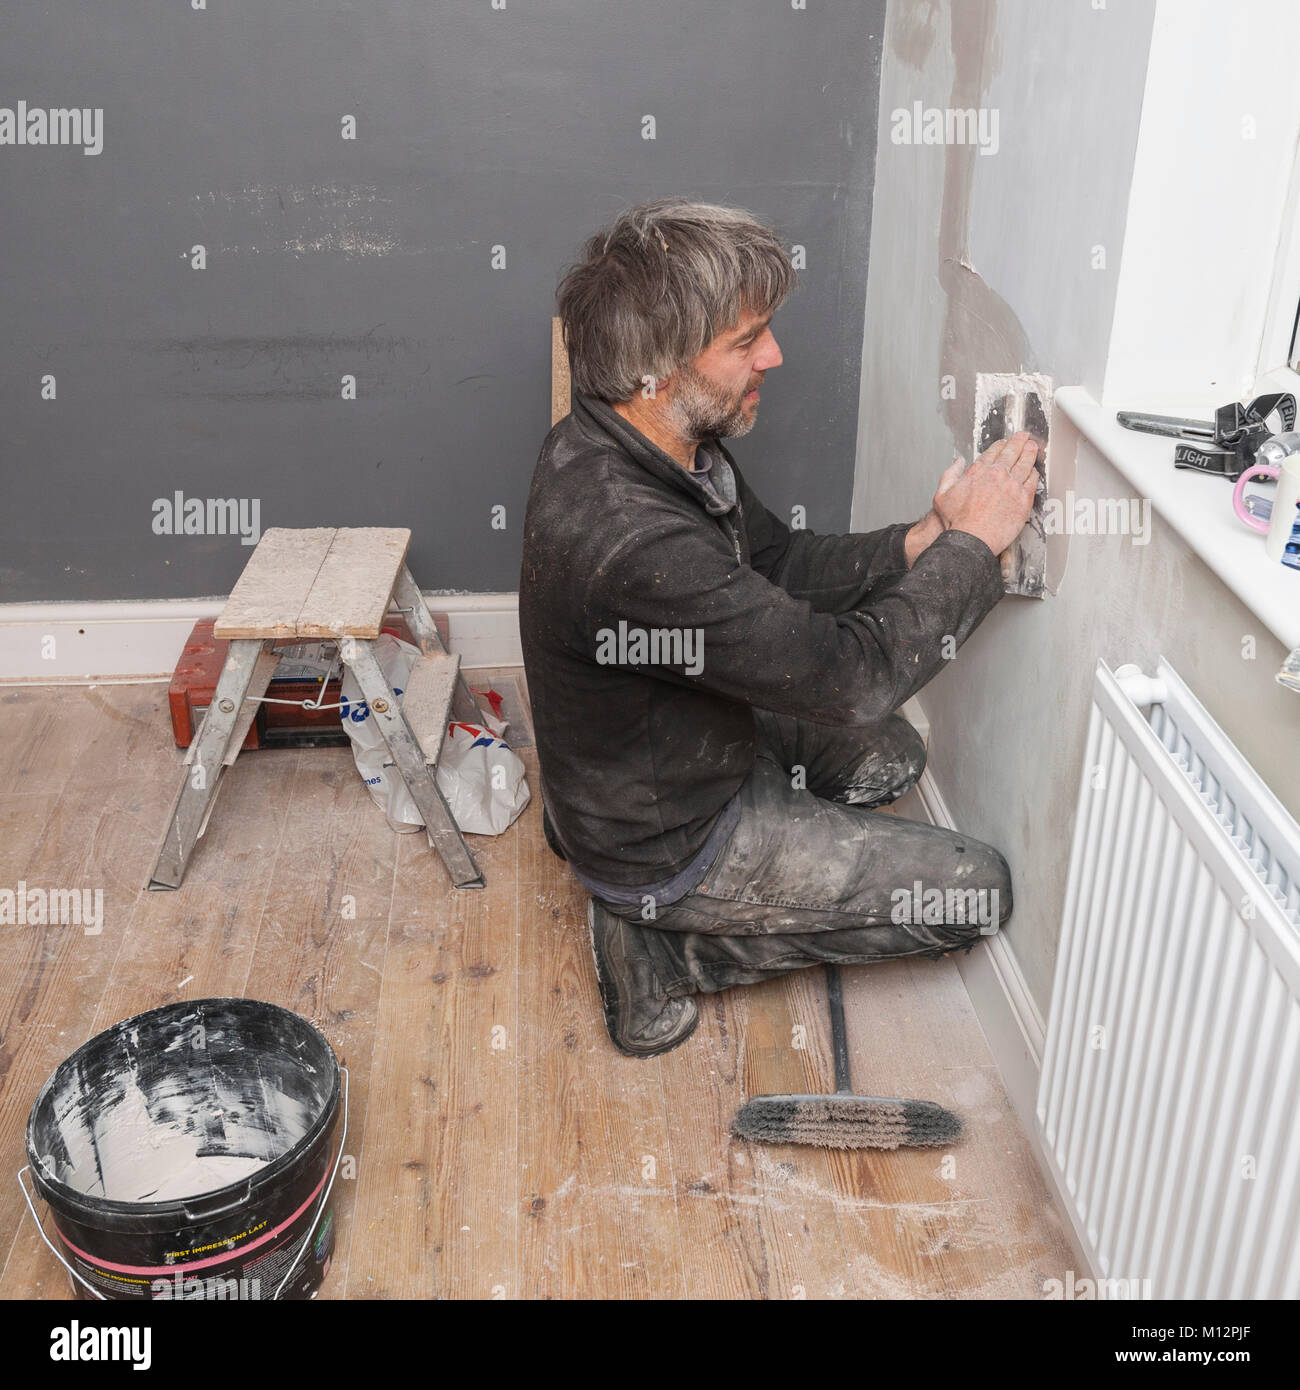 A man plastering some cracks in a wall in the Uk Stock Photo